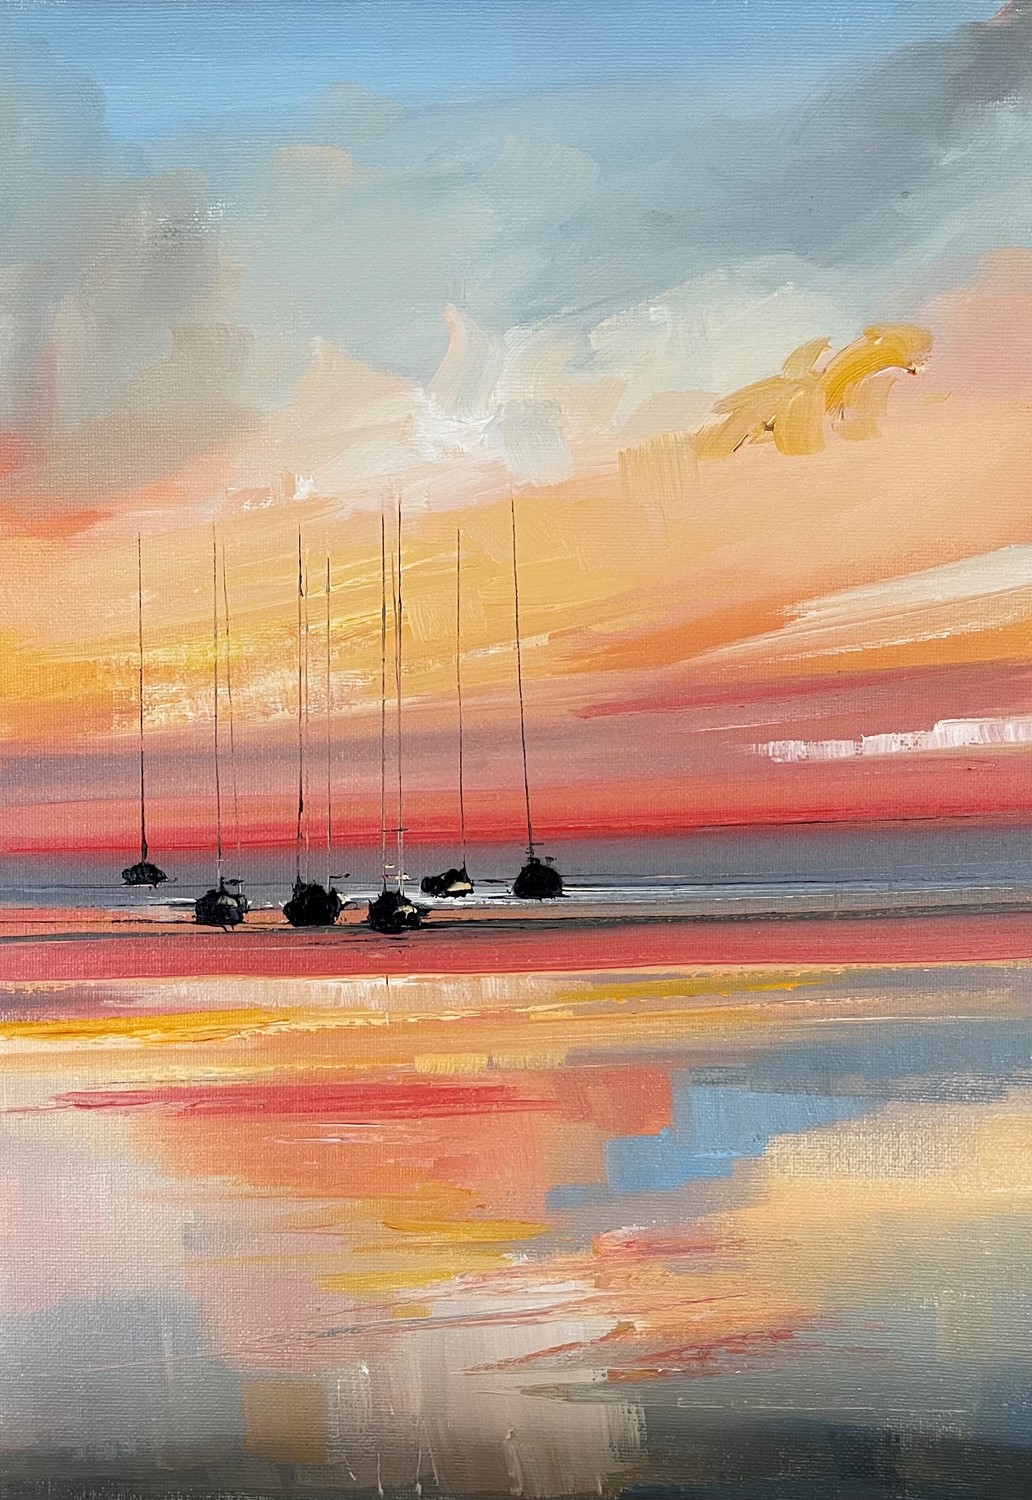 'While the sunsets' by artist Rosanne Barr